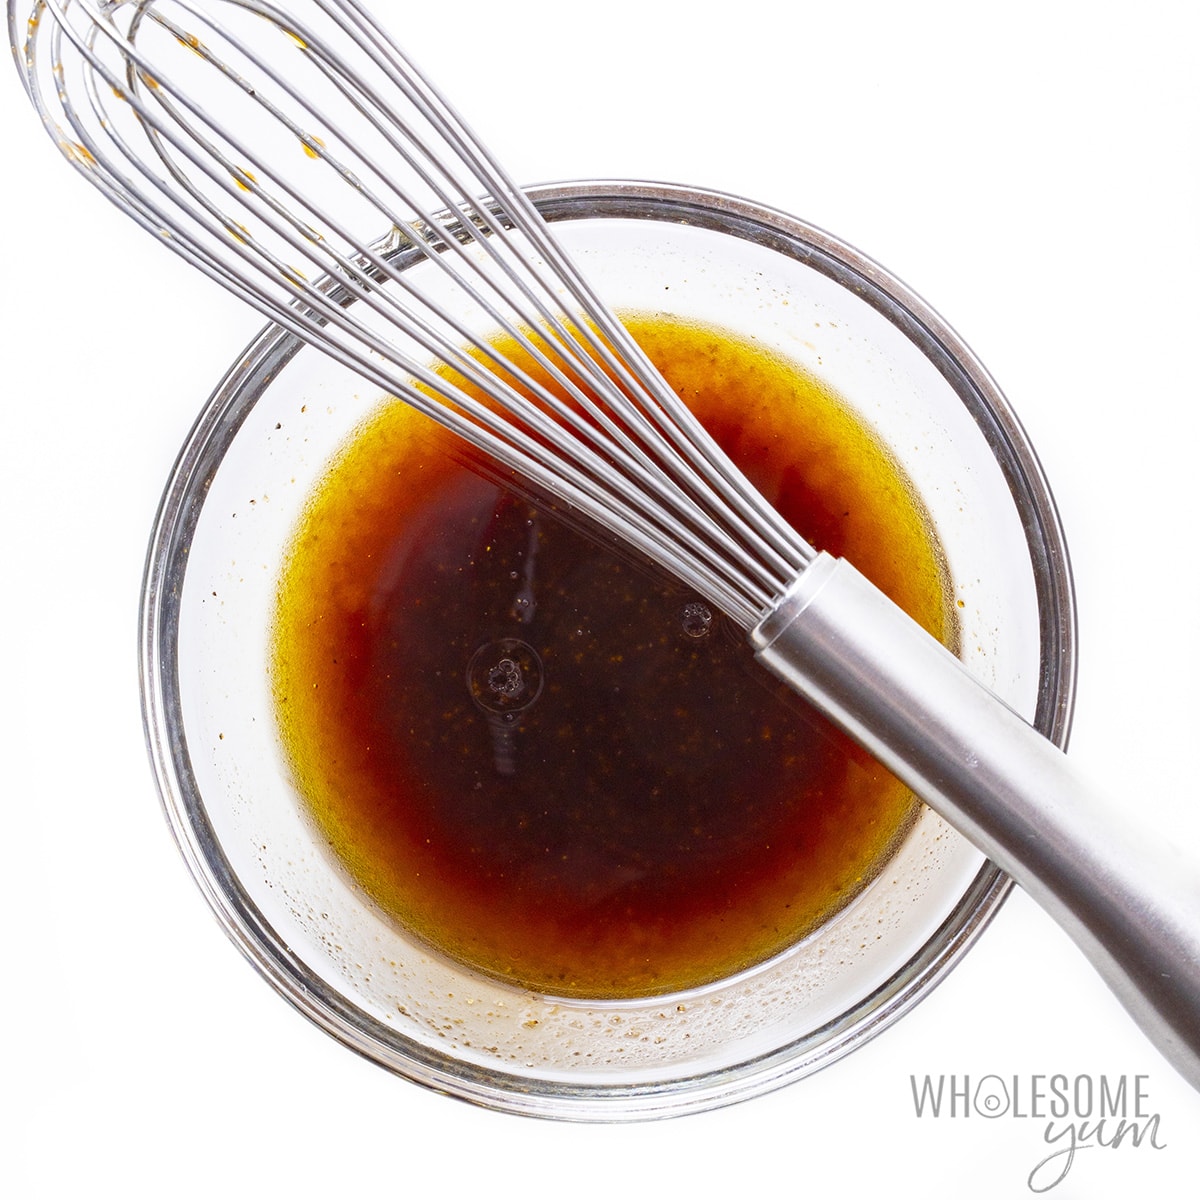 Butternut squash salad dressing in a bowl with whisk.